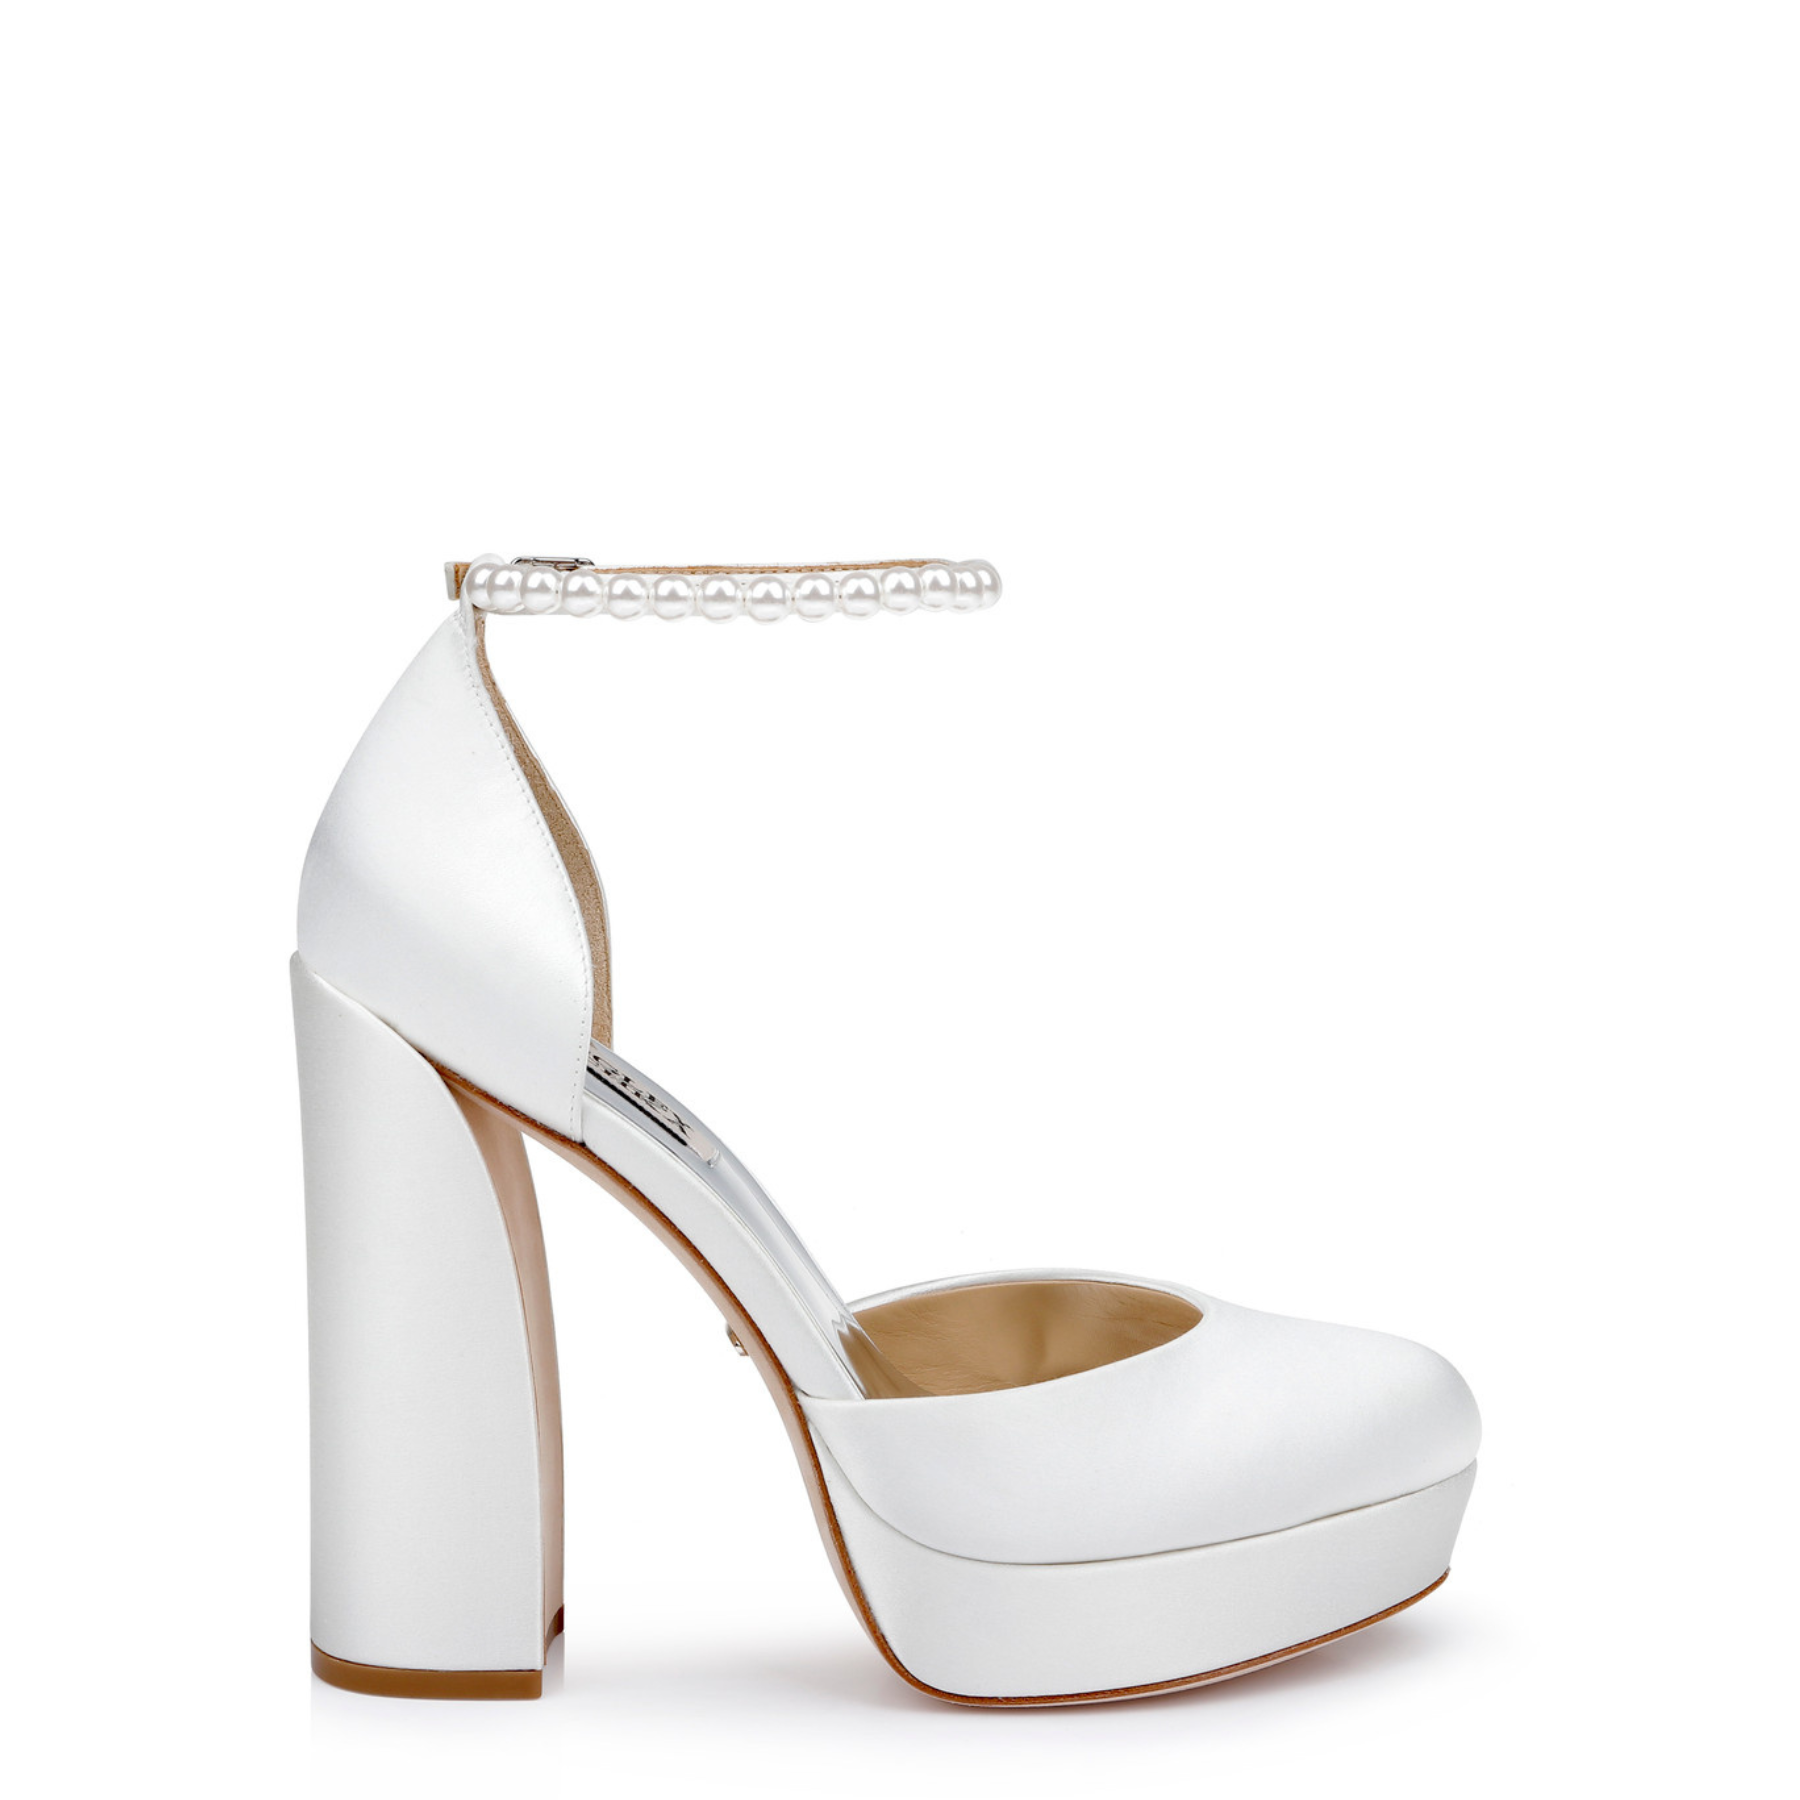 Felixa - Closed Toe Platform Heel with Pearl Ankle Strap - Soft White